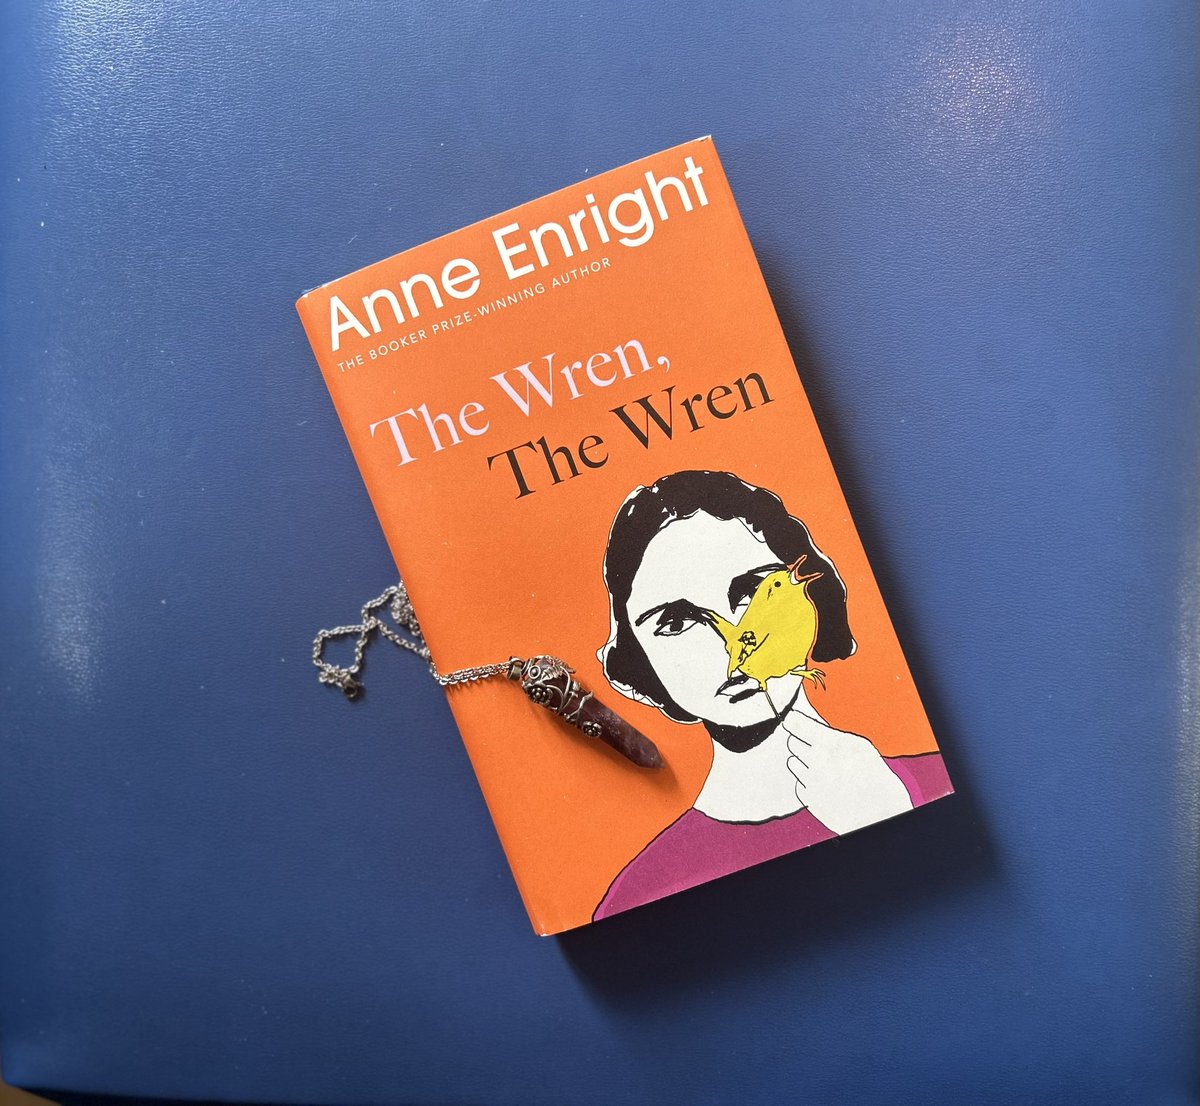 It is out today!
#AnneEnright #TheWrenTheWren, from @jonathancape

#fiction #newbooks #publicationday #London2023